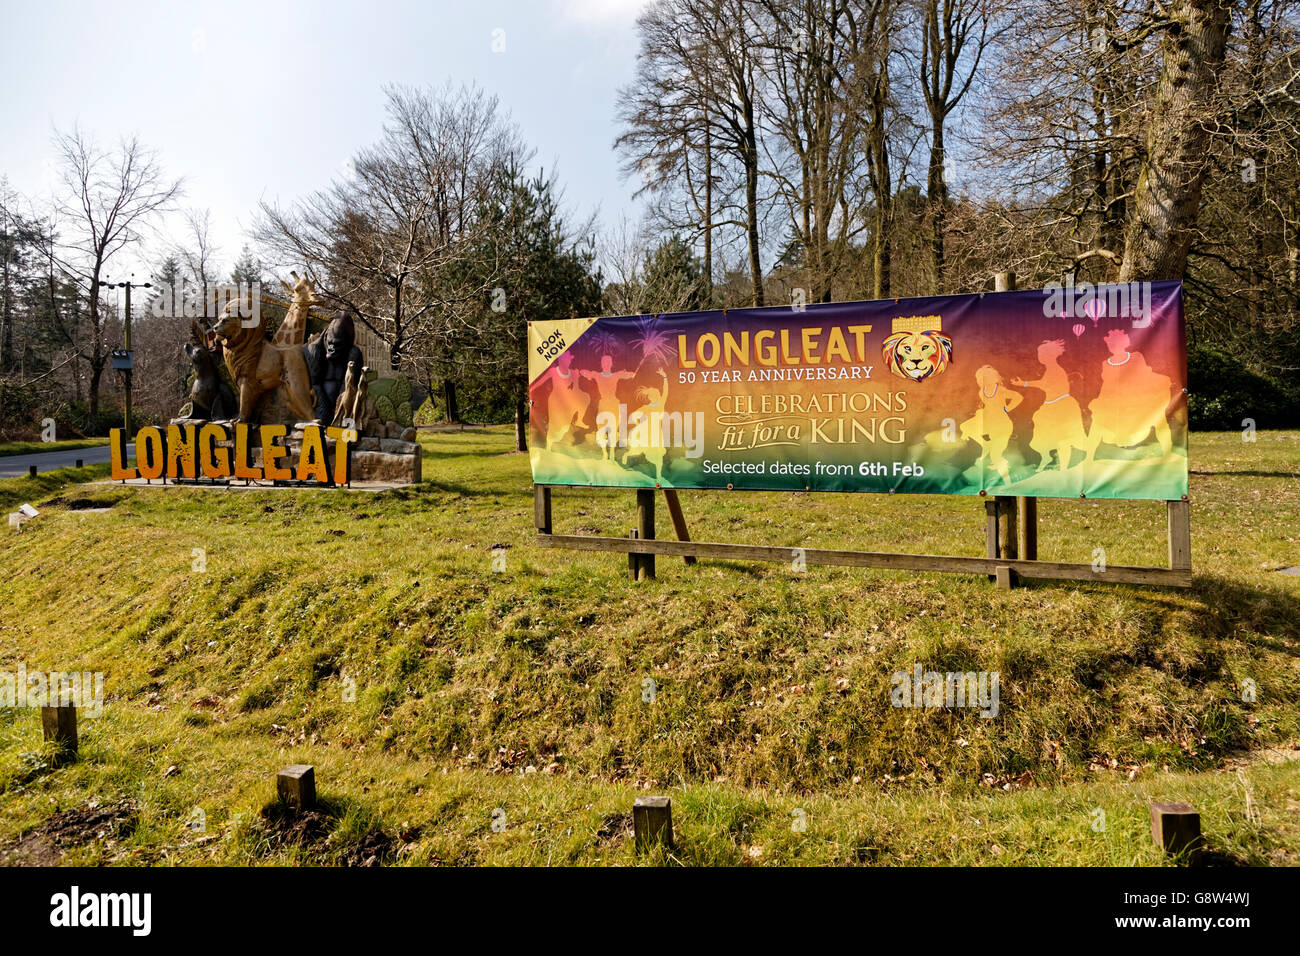 A banner celebrating the 50th Anniversary of Longleat at the entrance to the Longleat Estate, Wiltshire, UK. 17th March 2016. Stock Photo